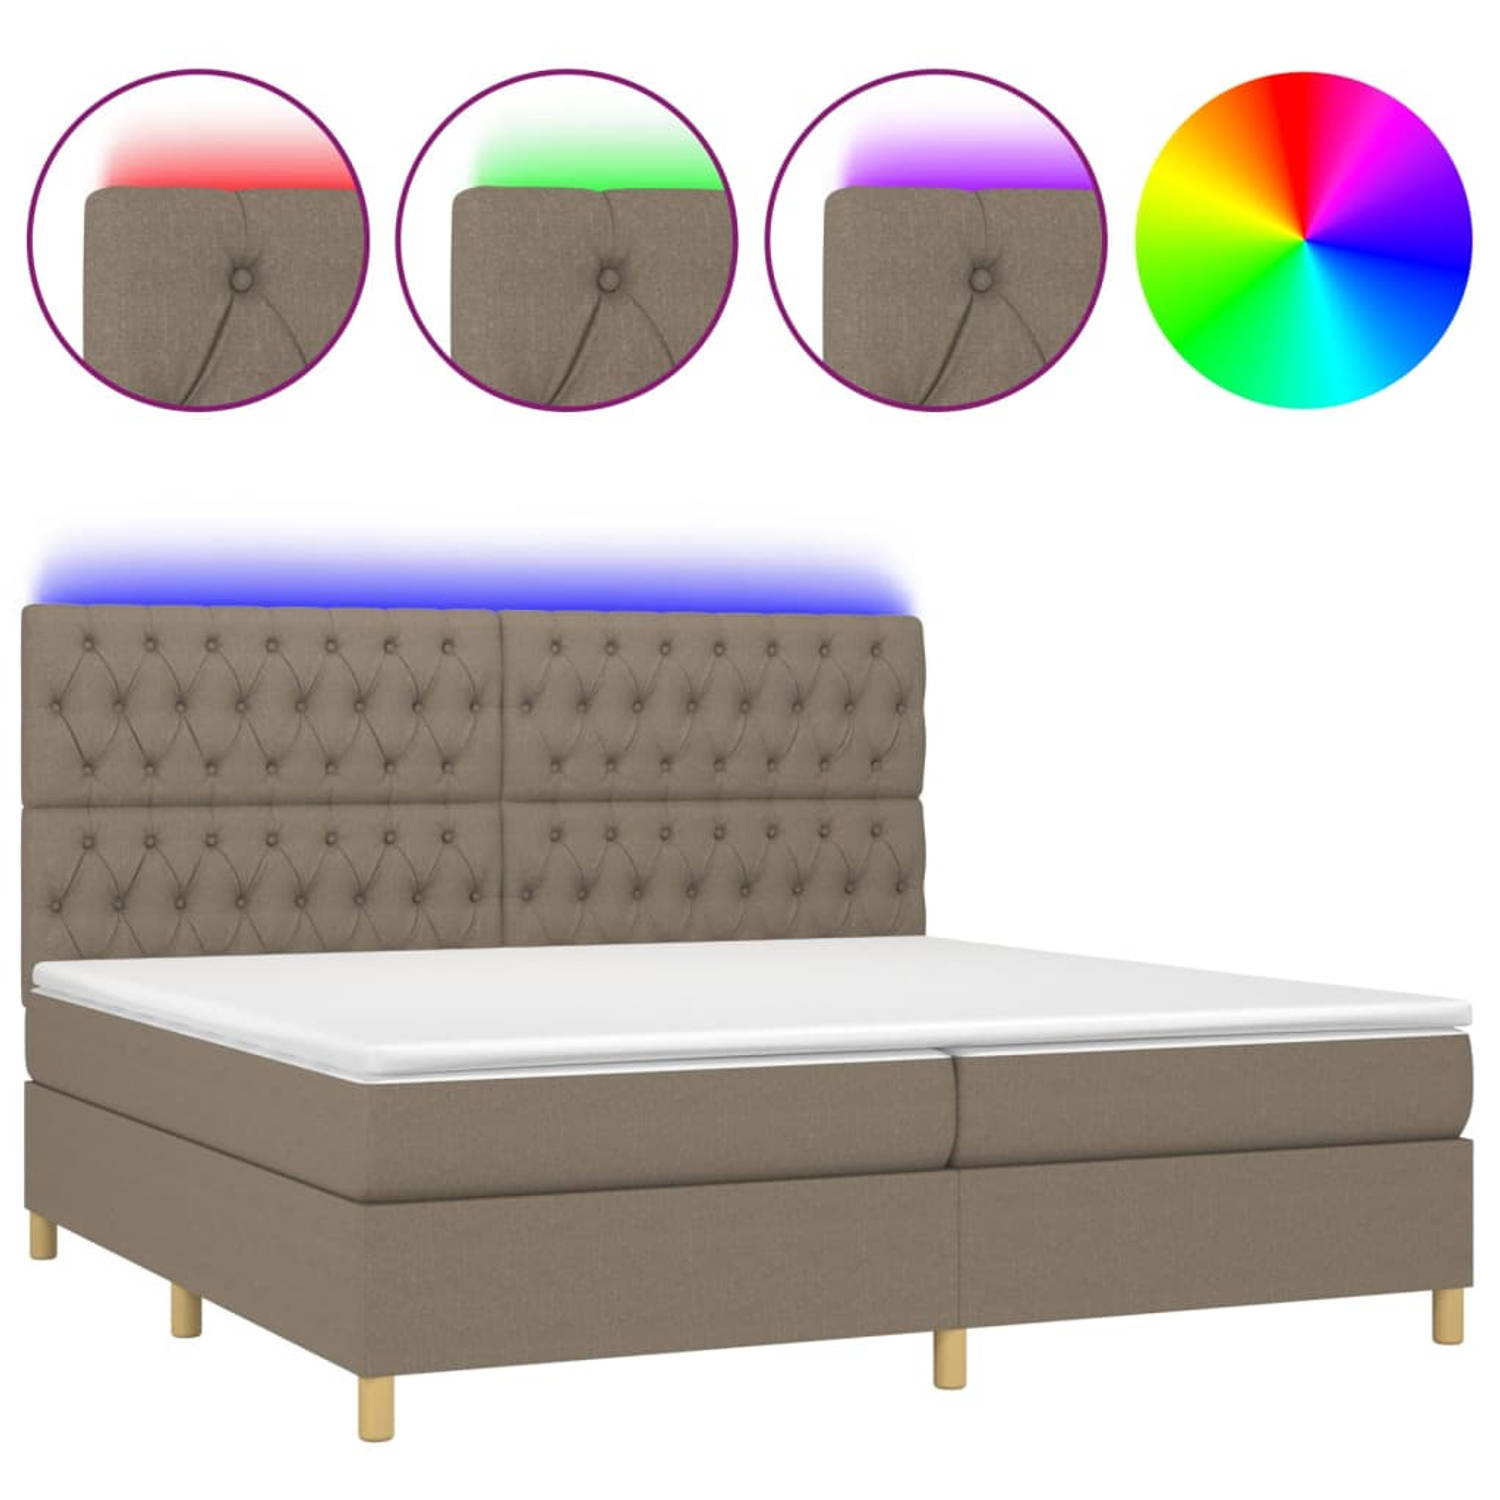 The Living Store Boxspring Met Matras en LED - Taupe - 203x200x118/128cm - Duurzaam materiaal